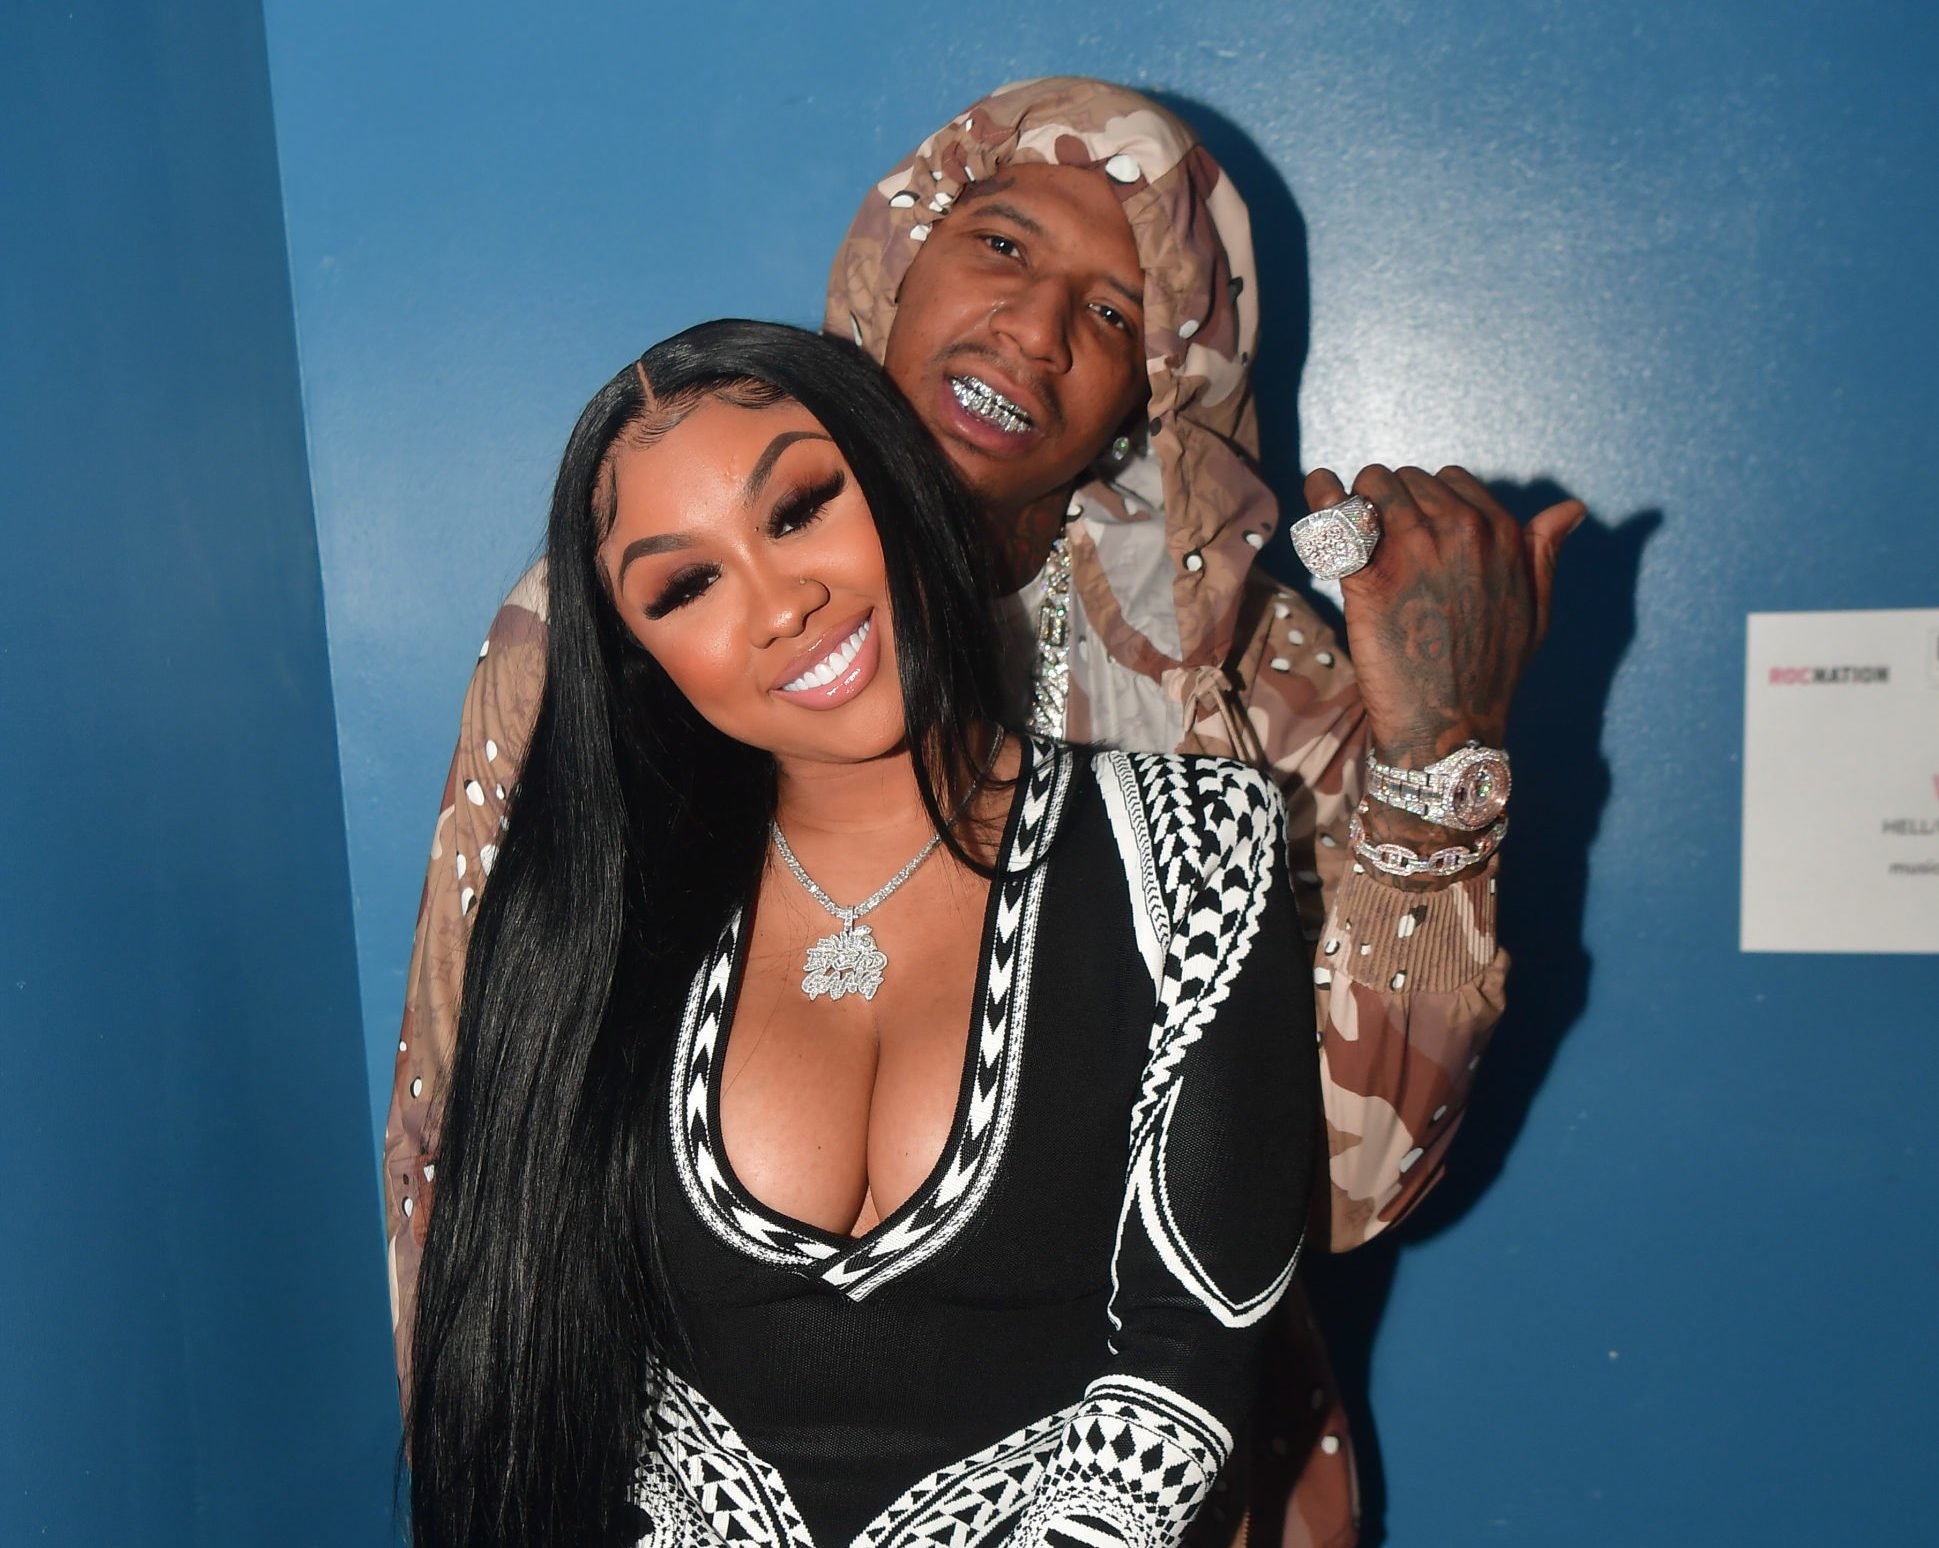 MoneyBagg Yo Gifted Ari Fletcher A Gorgeous Diamond Ring, Fans Speculate The Couple Got Engaged (Video)